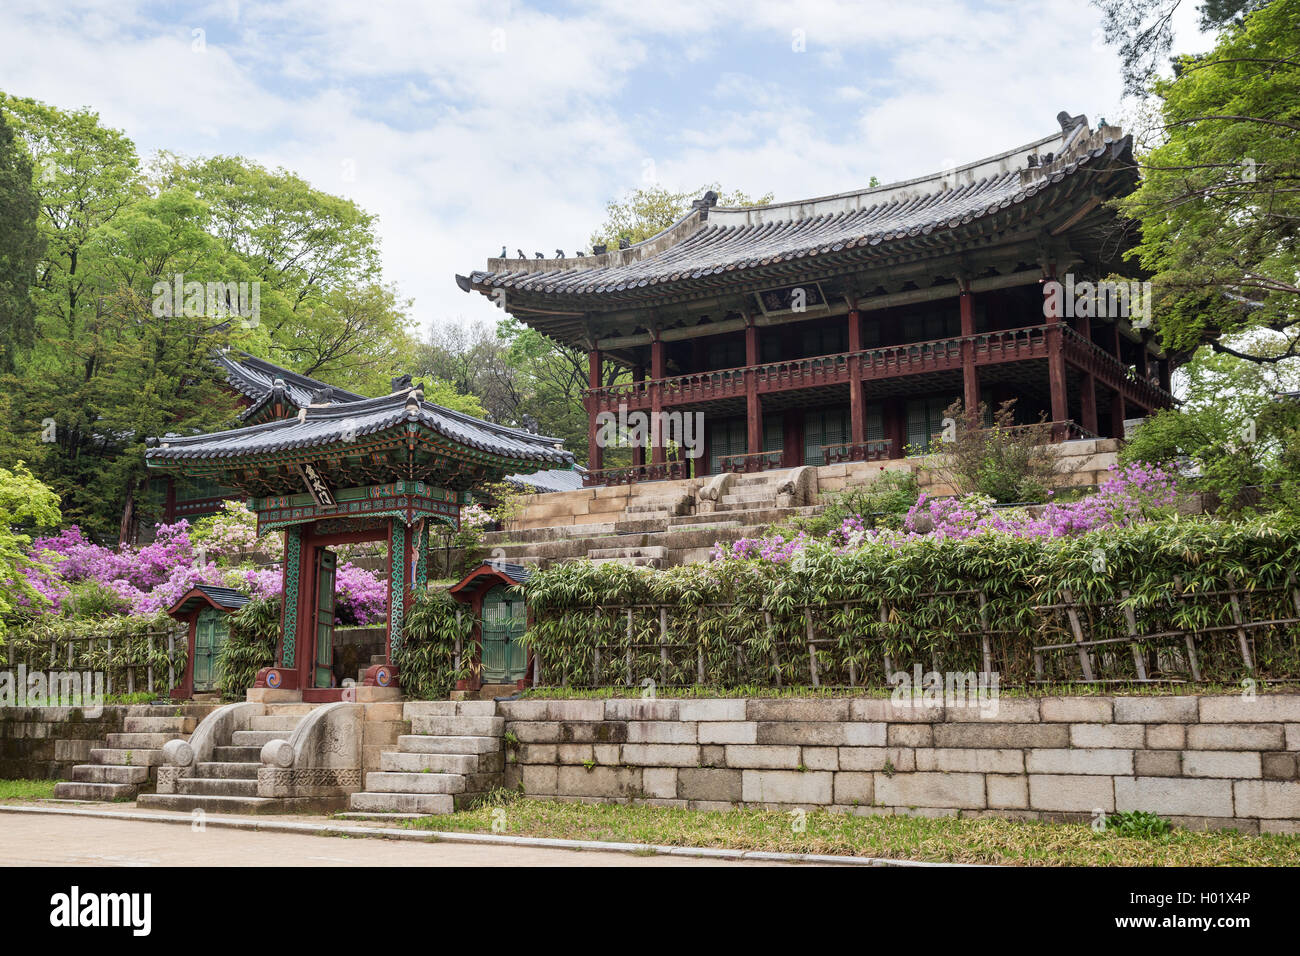 View of Juhamnu Pavilion at Huwon (Secret Garden) at the Changdeokgung Palace in Seoul, South Korea. Stock Photo